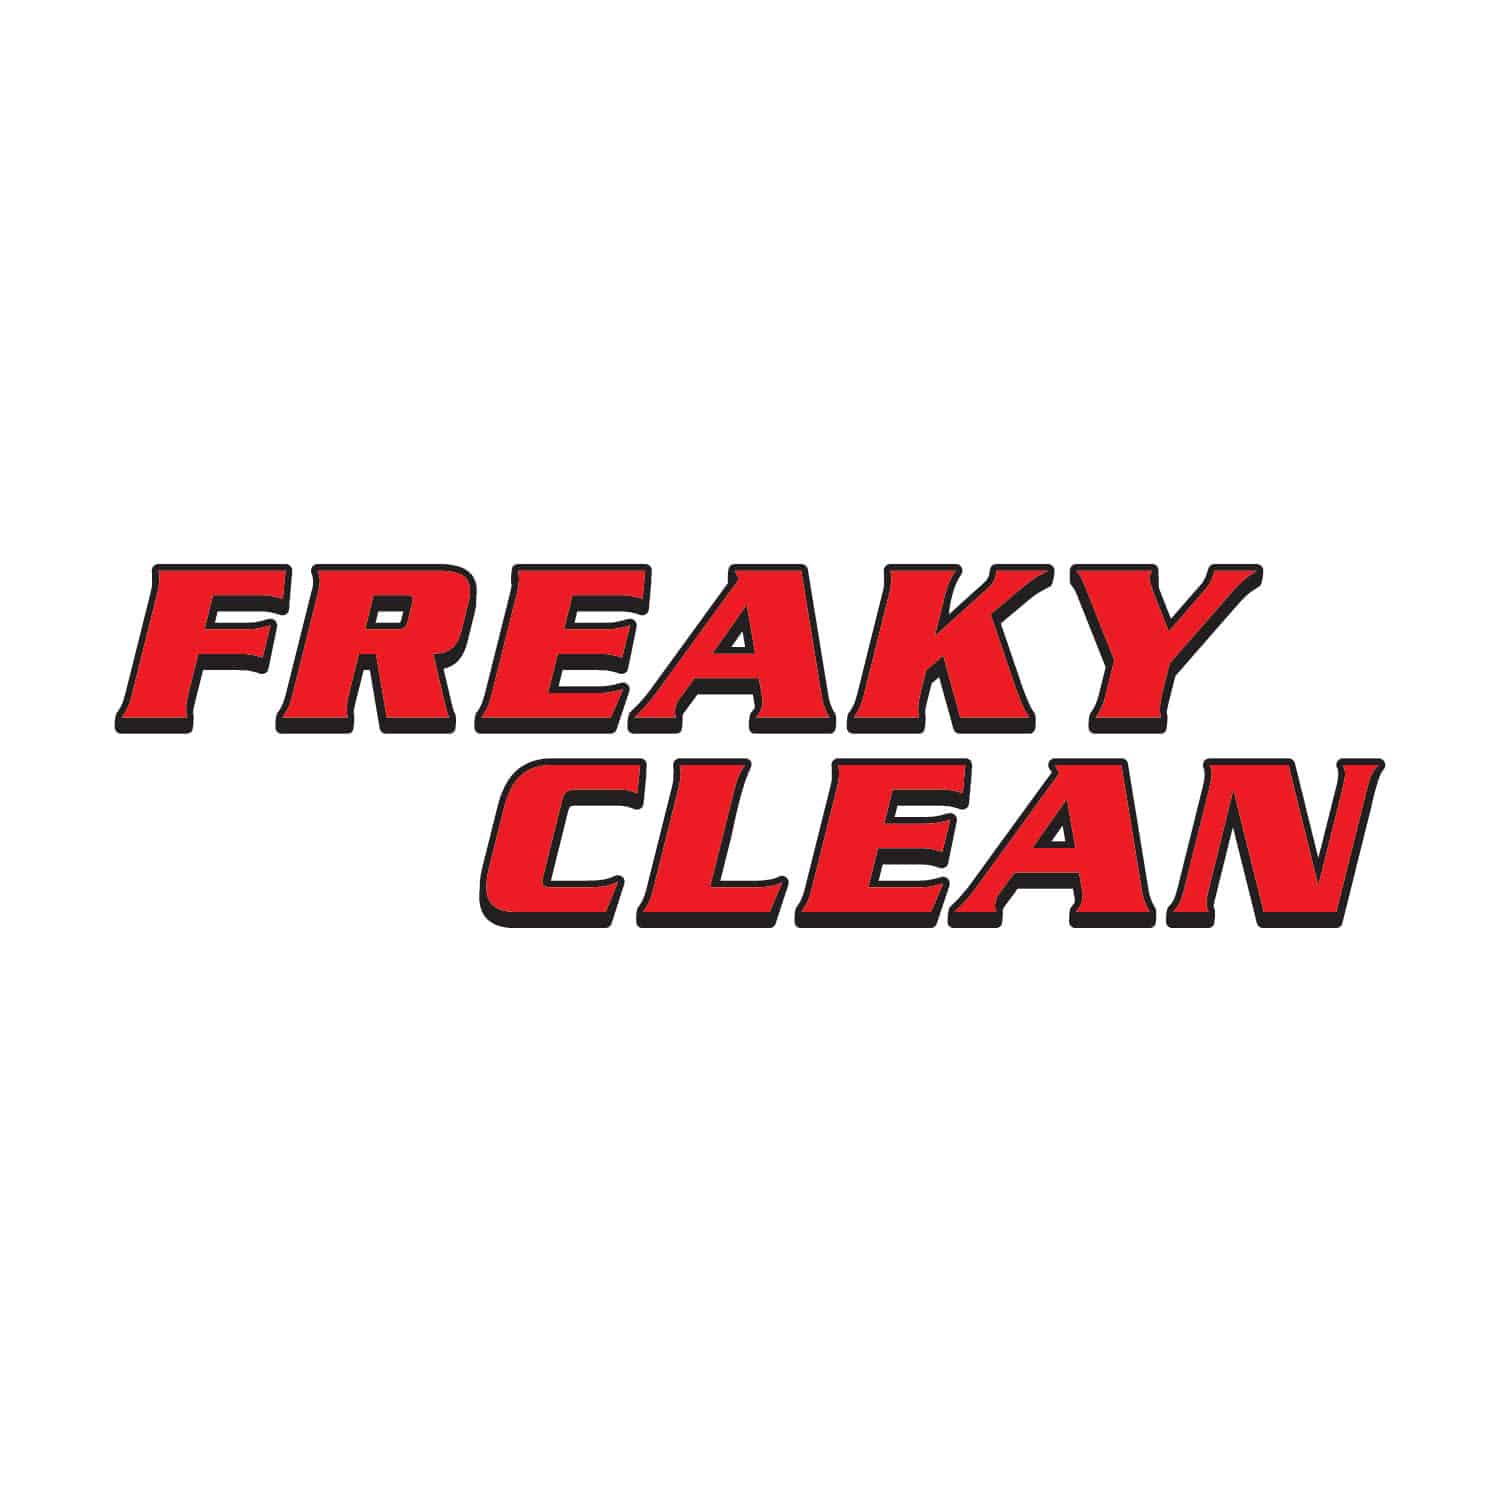 Freaky Clean Corp